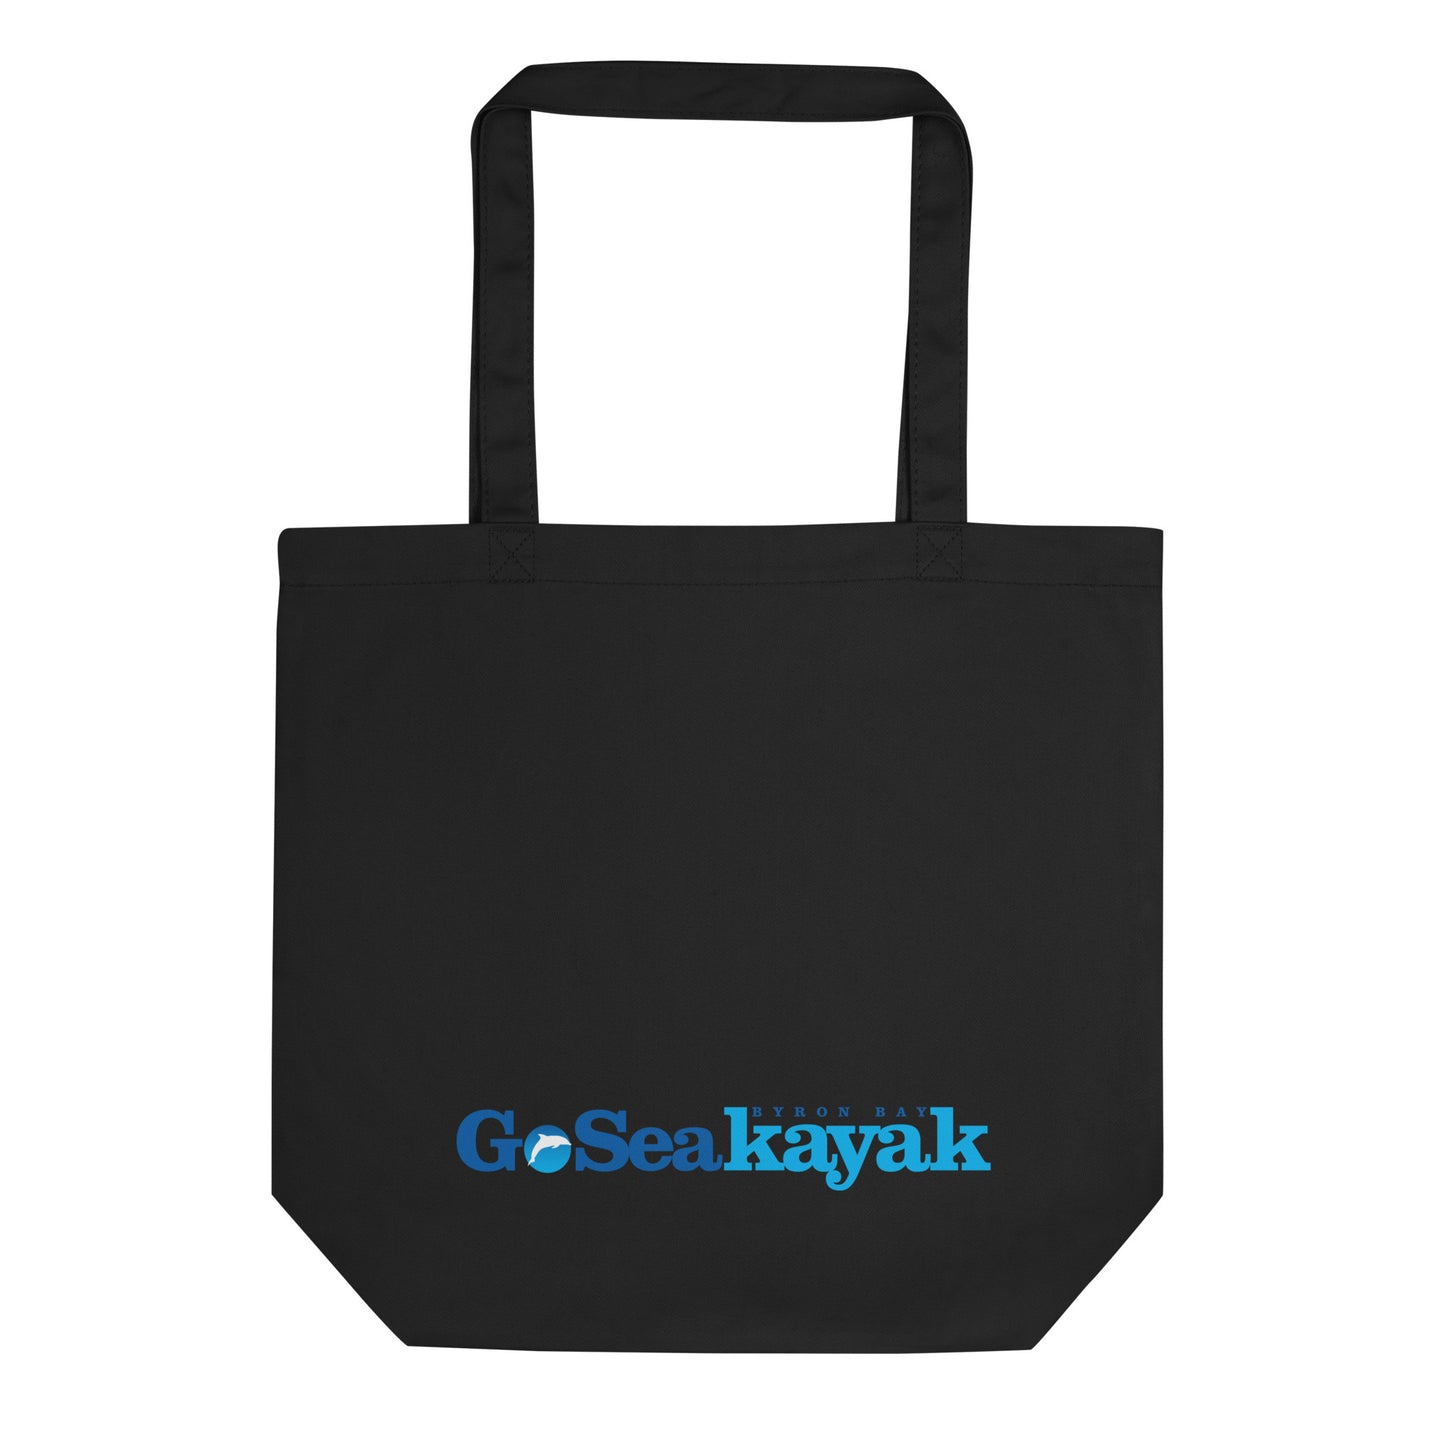  Eco Tote Bag - Black  - Front view - With Go Sea Kayak Byron Bay logo on front - Genuine Byron Bay Merchandise | Produced by Go Sea Kayak Byron Bay 